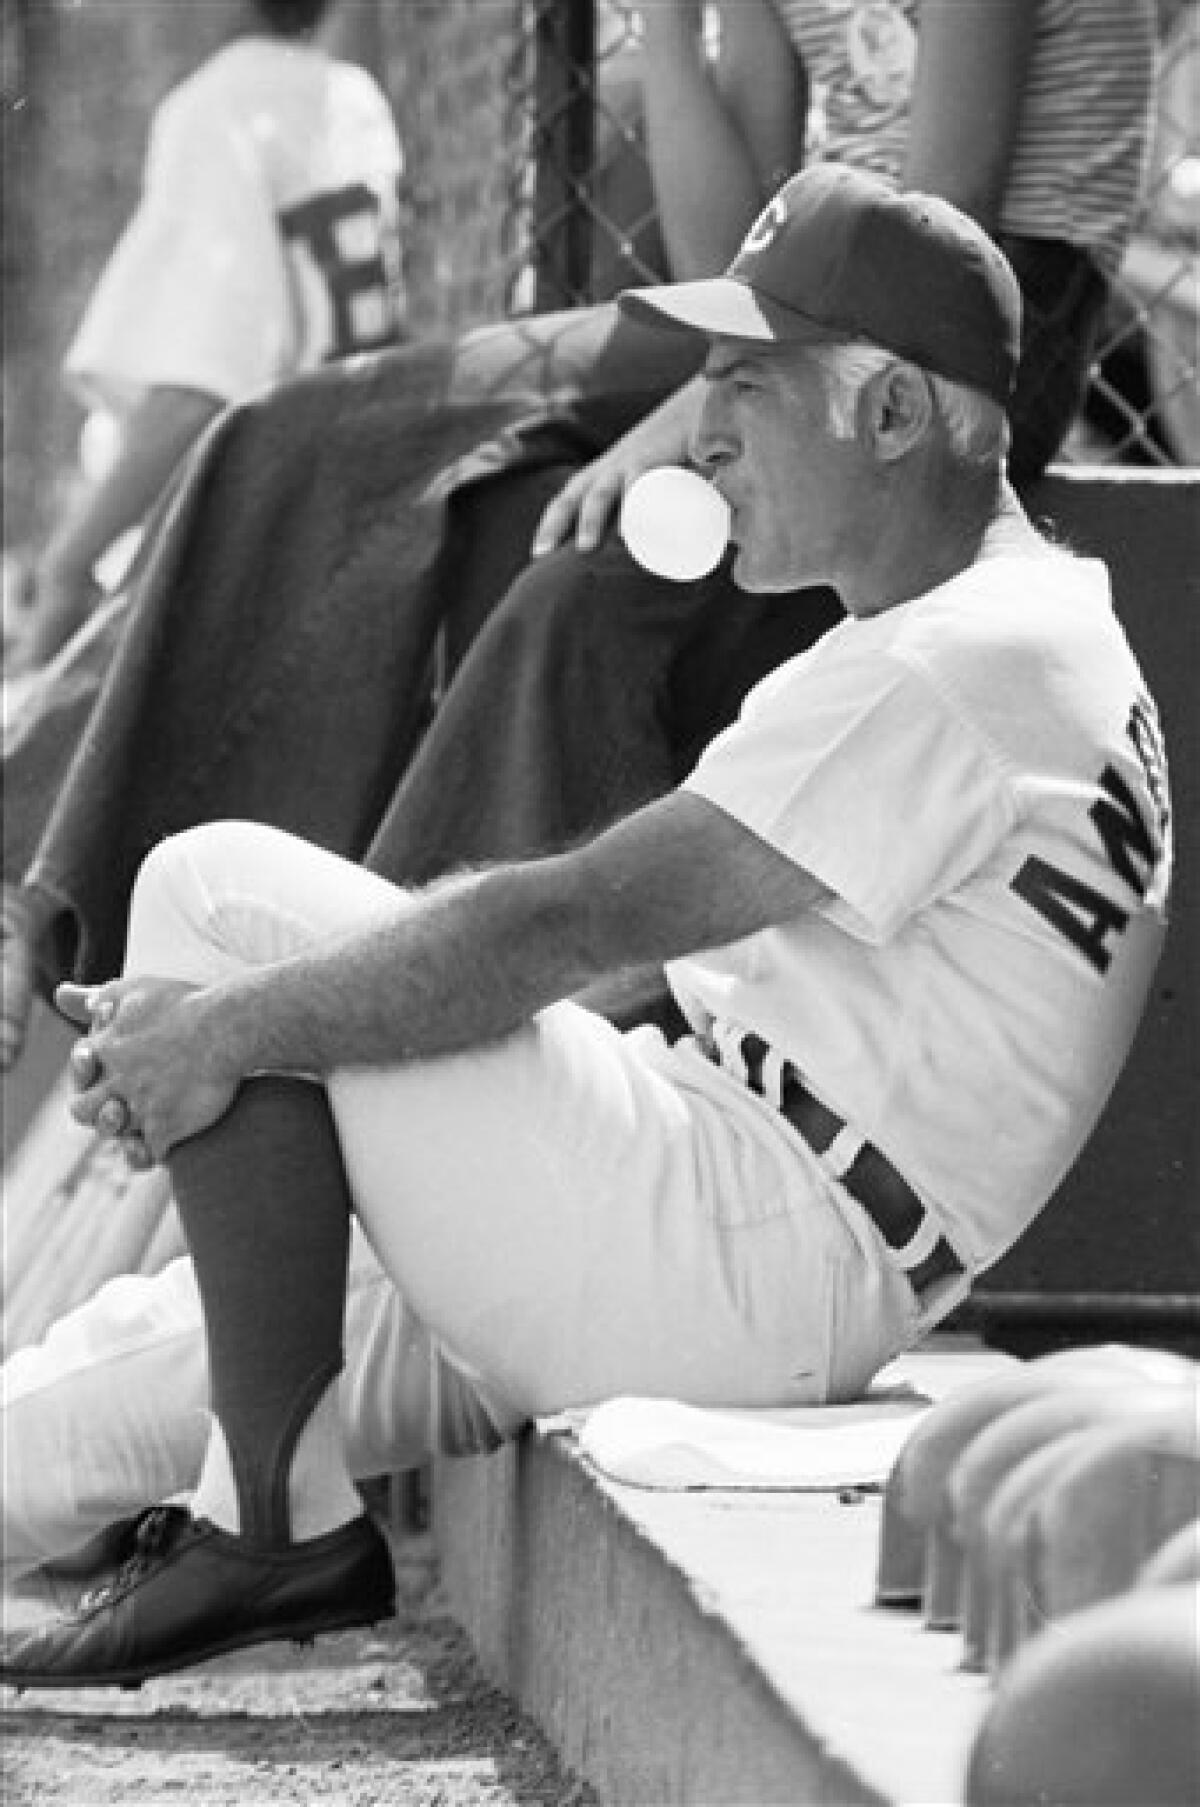 Detroit Tigers Hall of Fame manager Sparky Anderson, age 50, 1984 :  r/OldSchoolCool